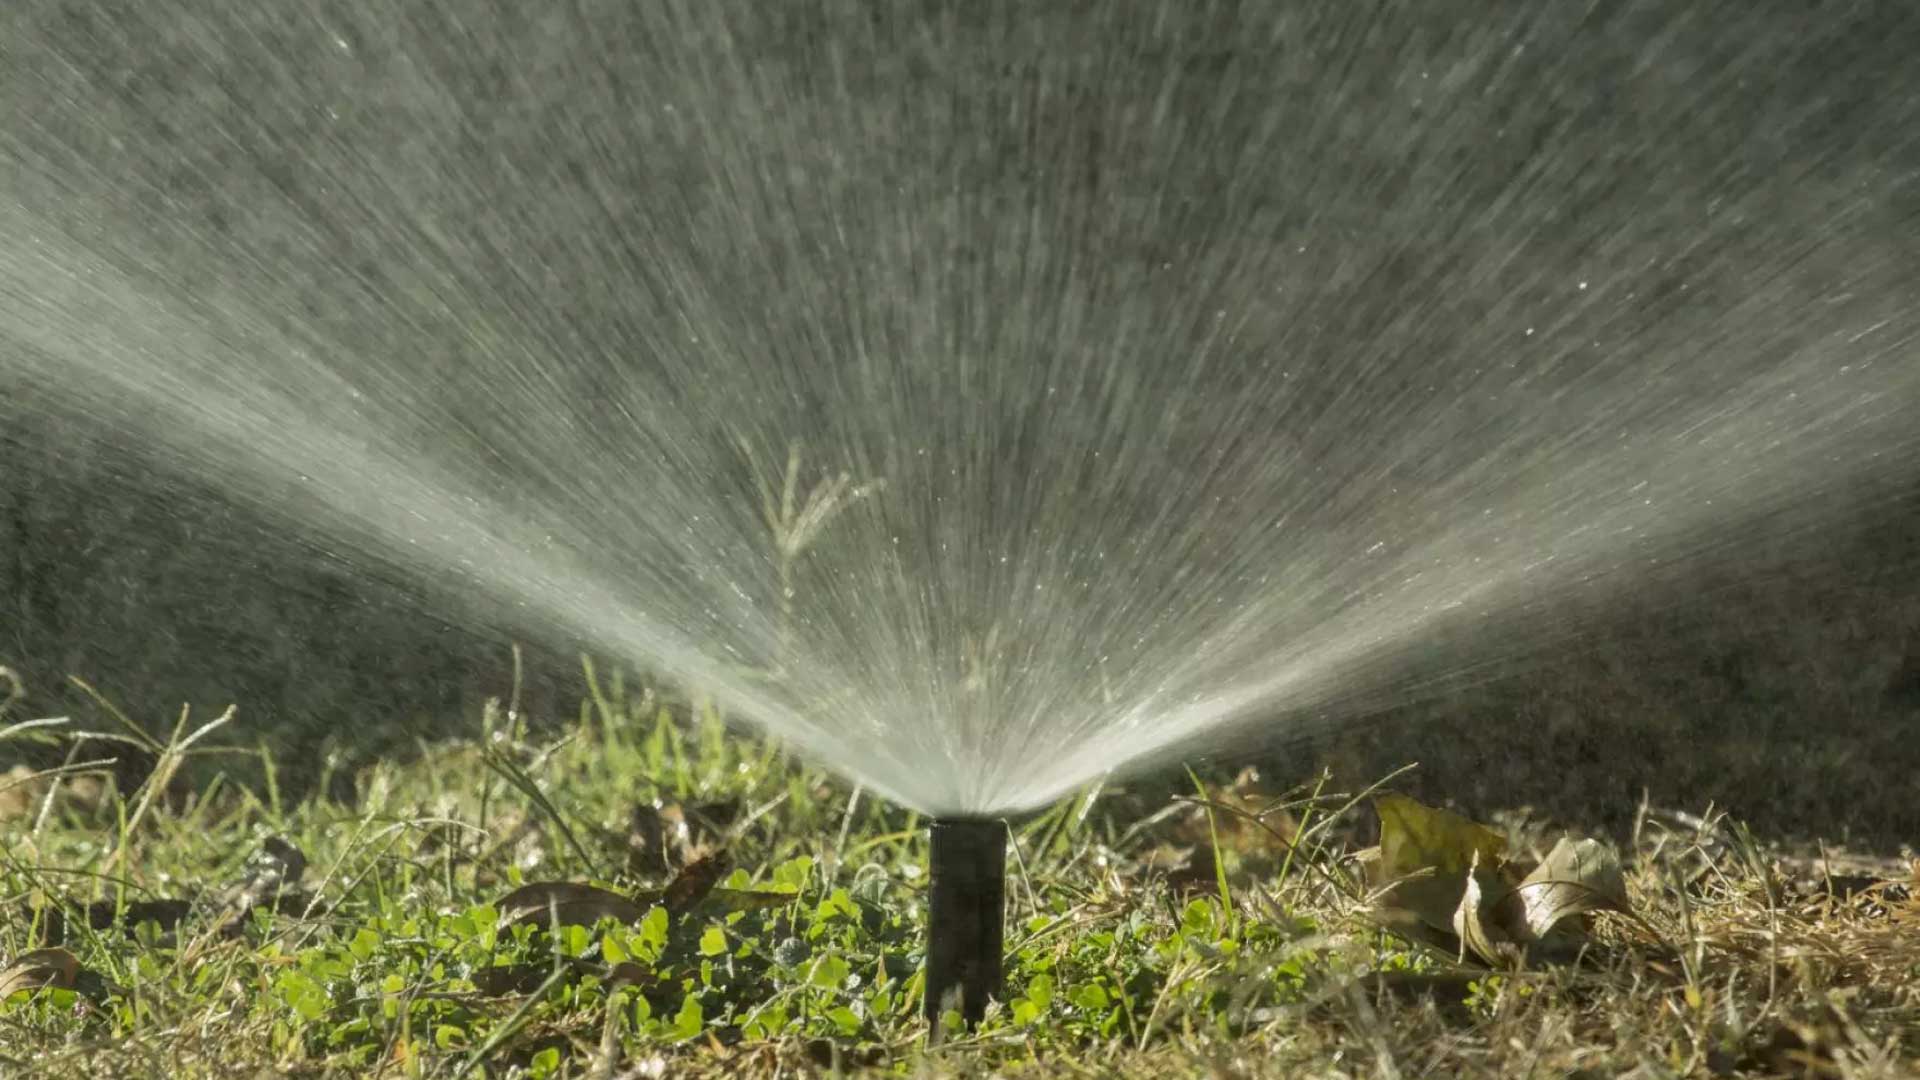 A sprinkler runs on a hot day in Phoenix.